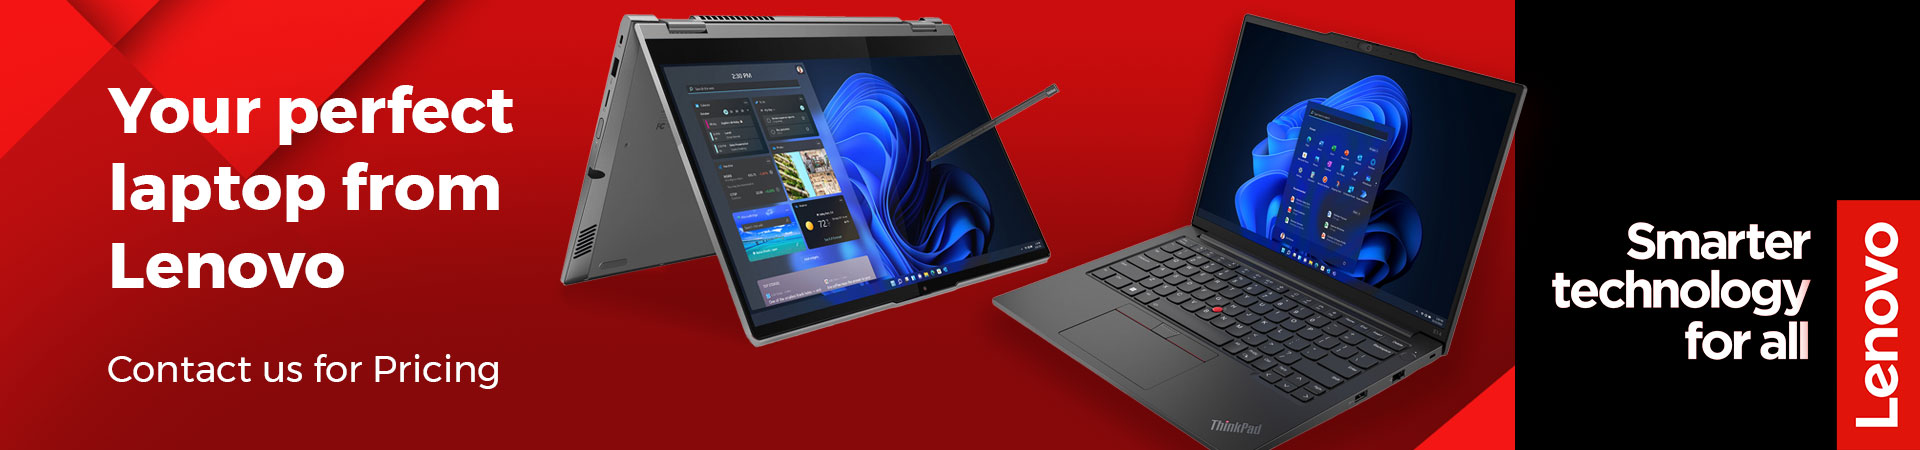 Your perfect laptop from Lenovo - Contact us for pricing. Lenovo - Technology for all.